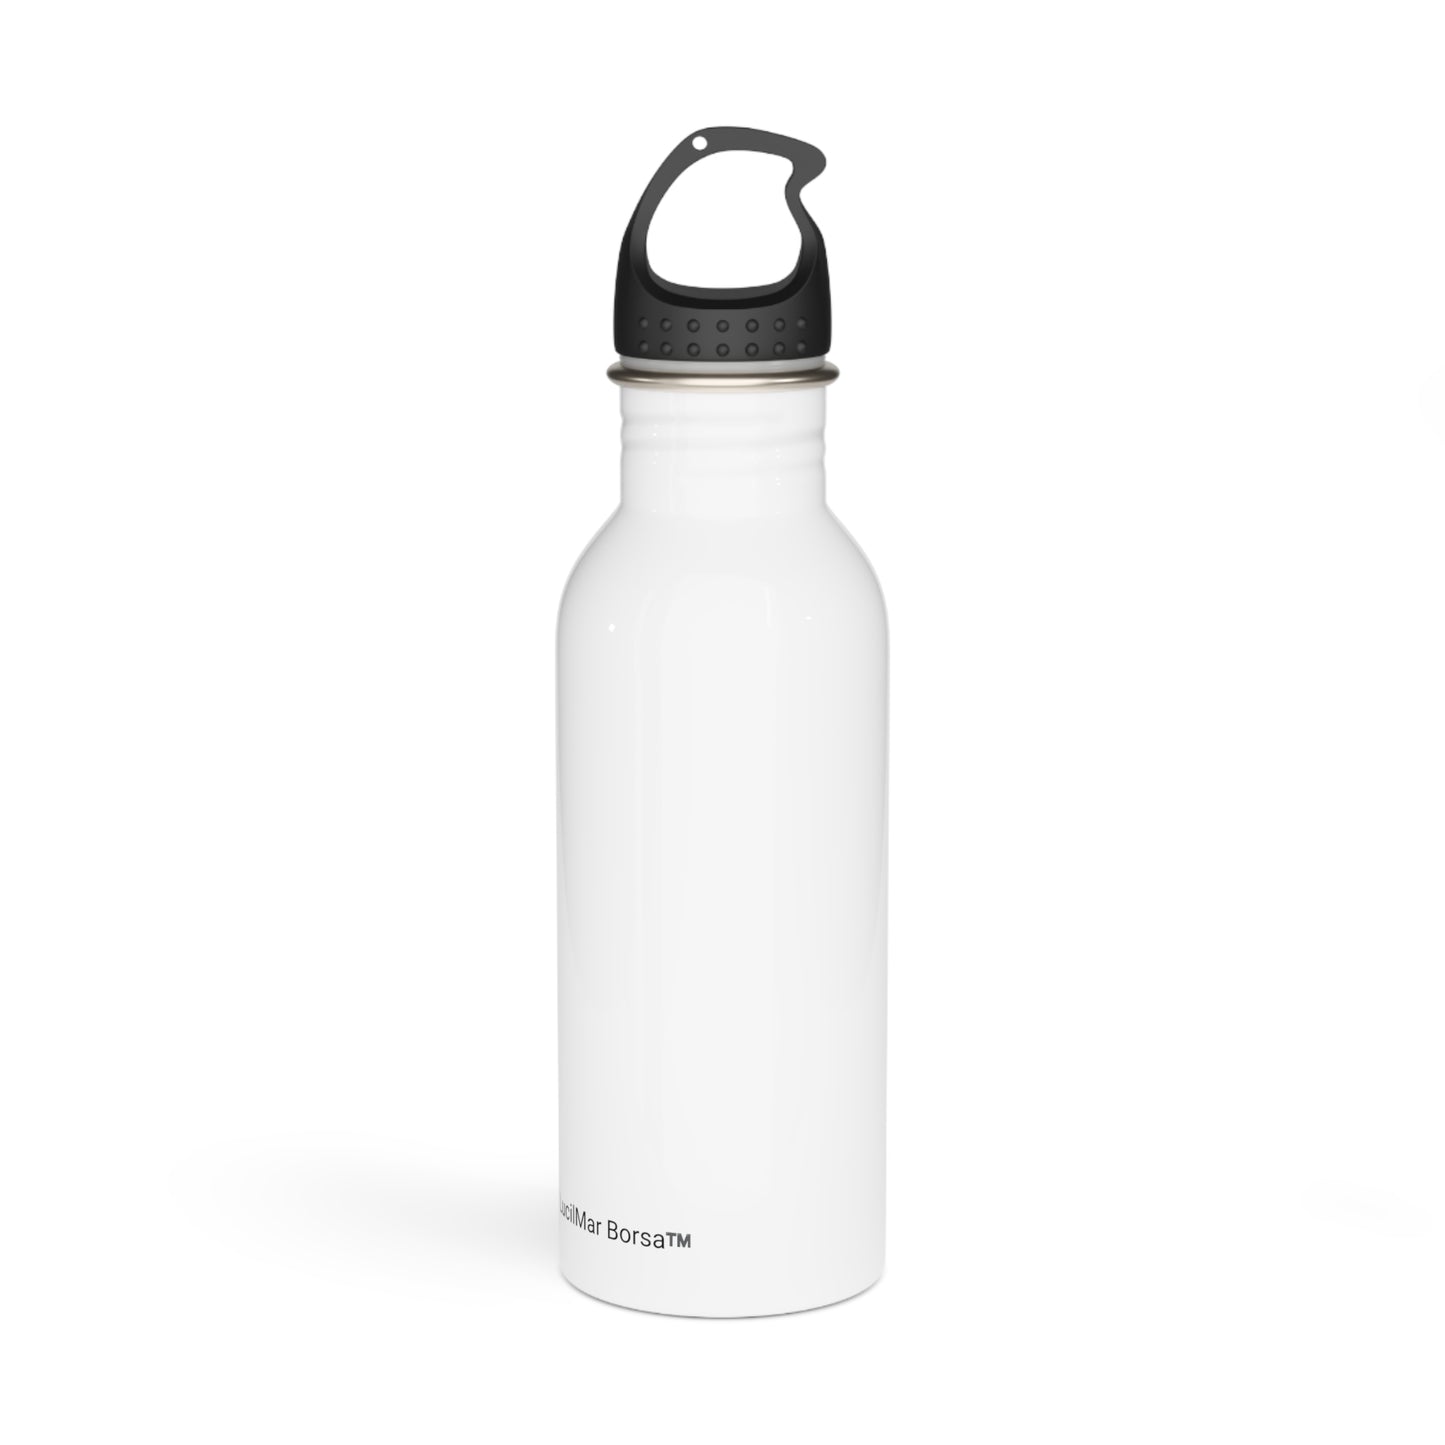 In Movement, We Find Momentum Stainless Steel Water Bottle with AFFIRMATION